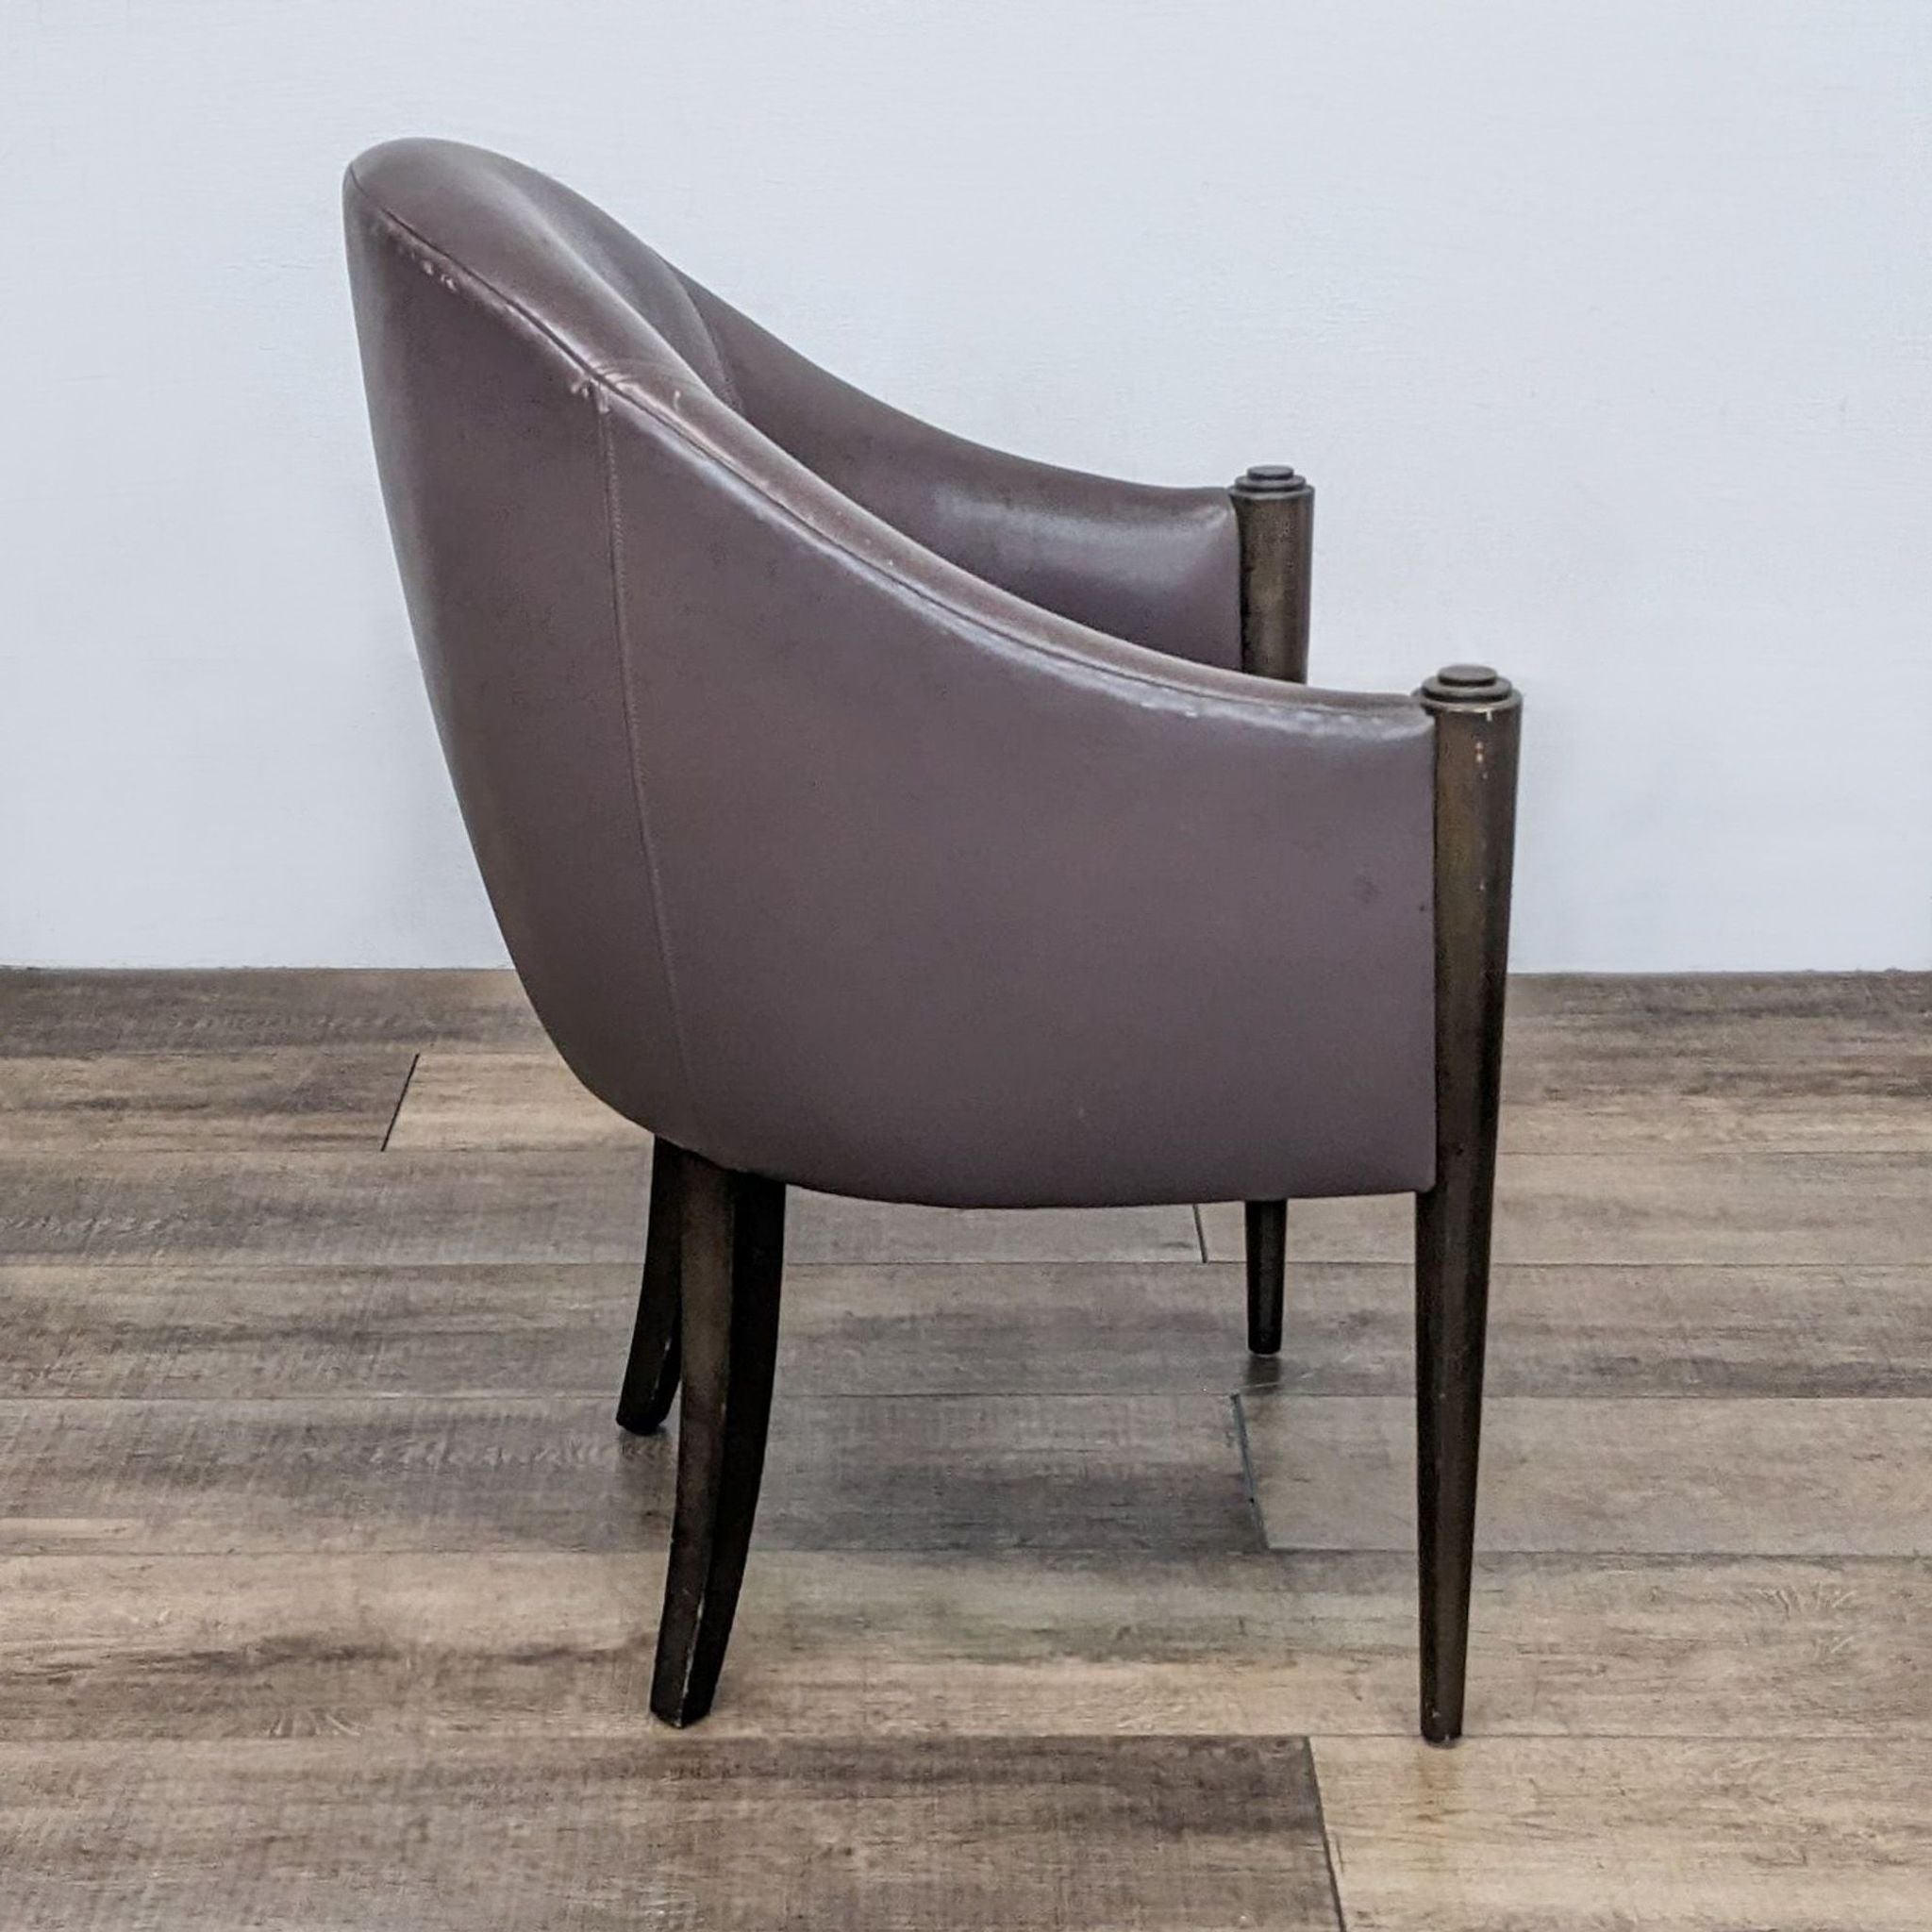 Side view of a Donghia leather lounge chair showcasing its curved back design and step down top legs on a hardwood floor.